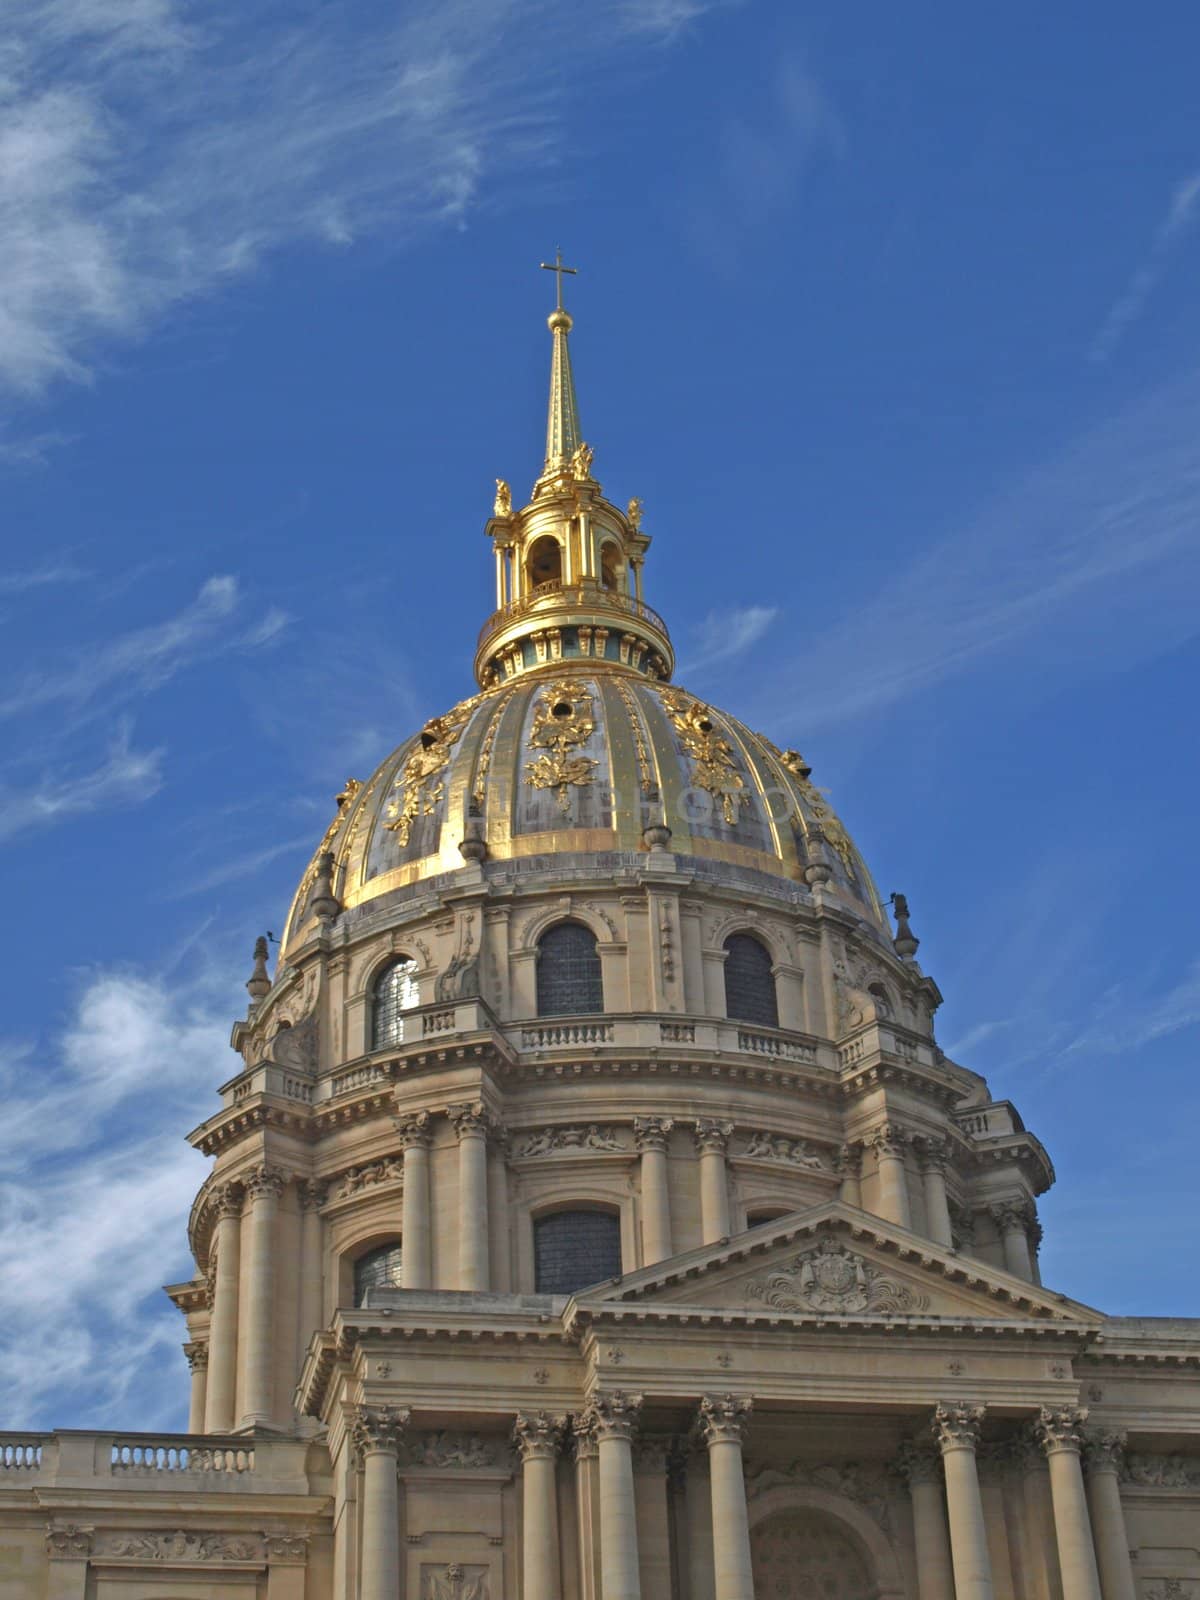 View of the dome of the Chapel of Invalides